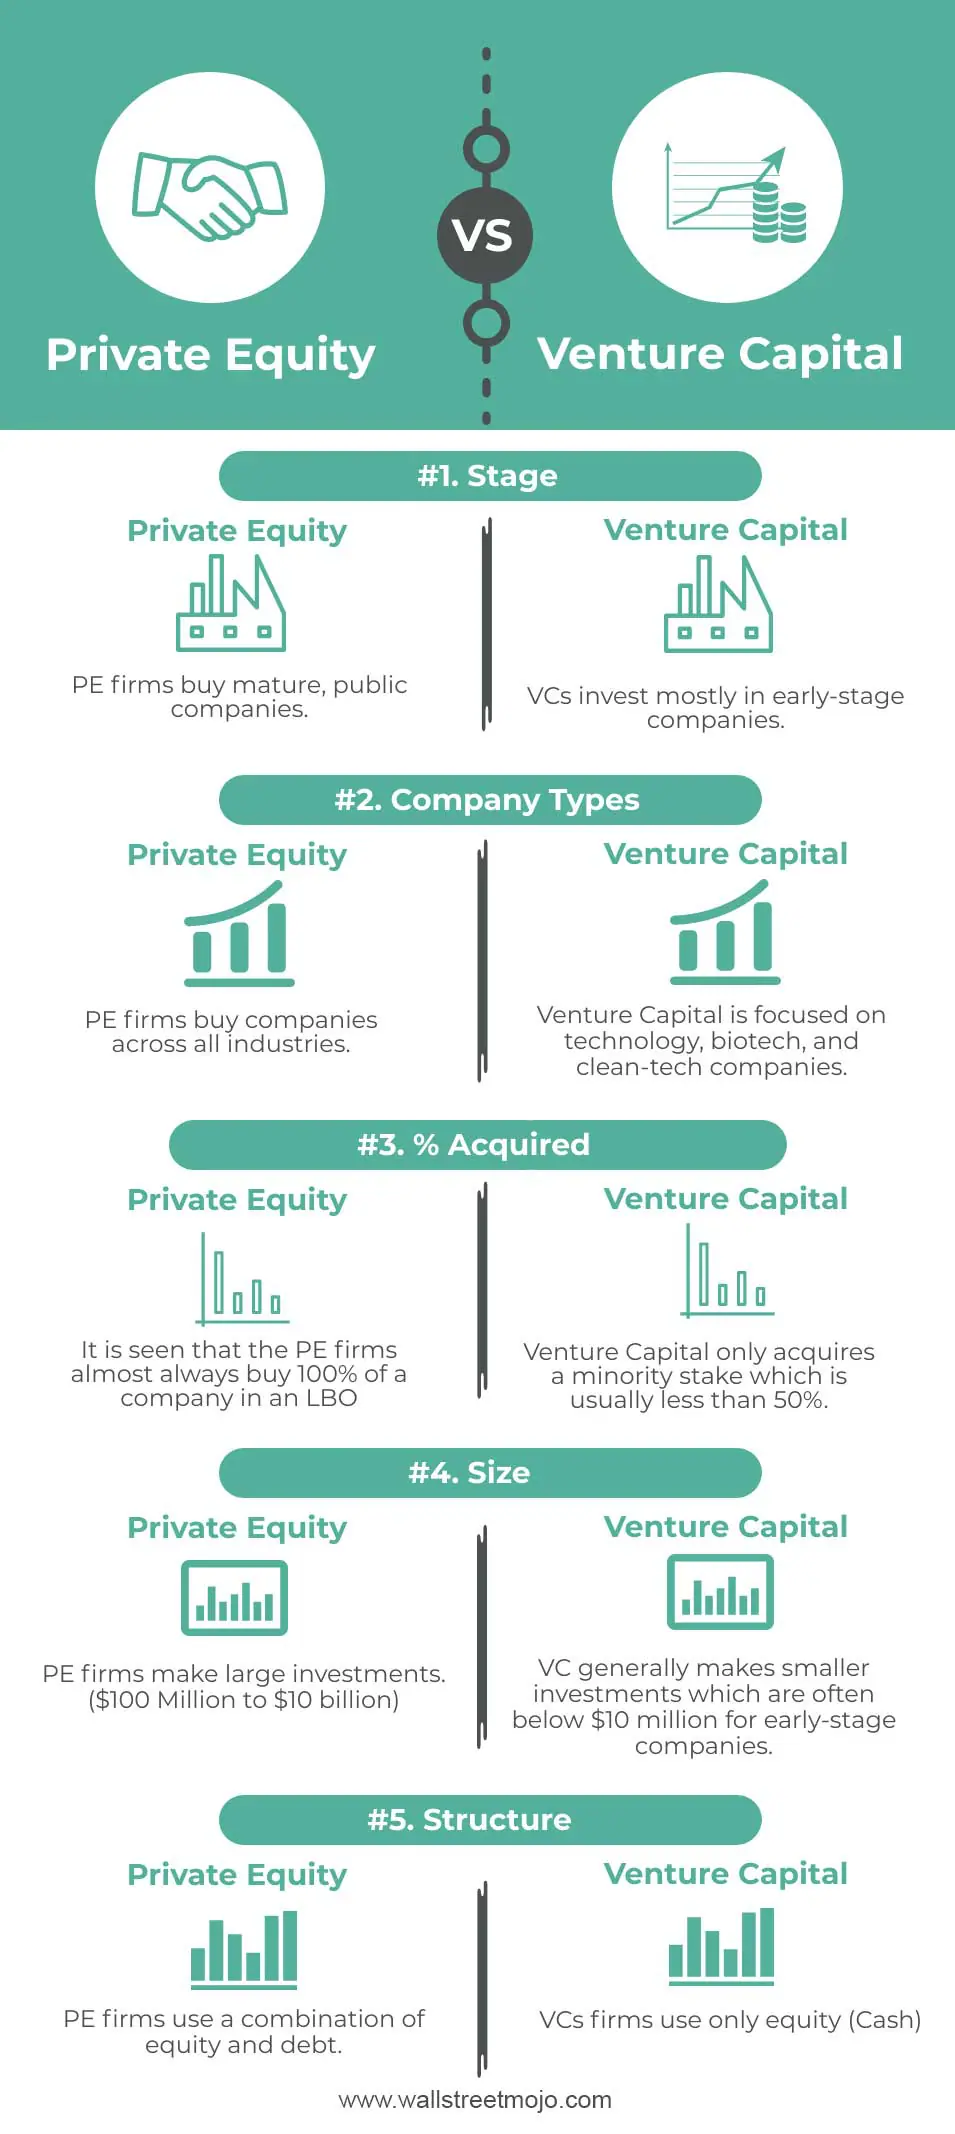 How to Attract Private Equity Investors